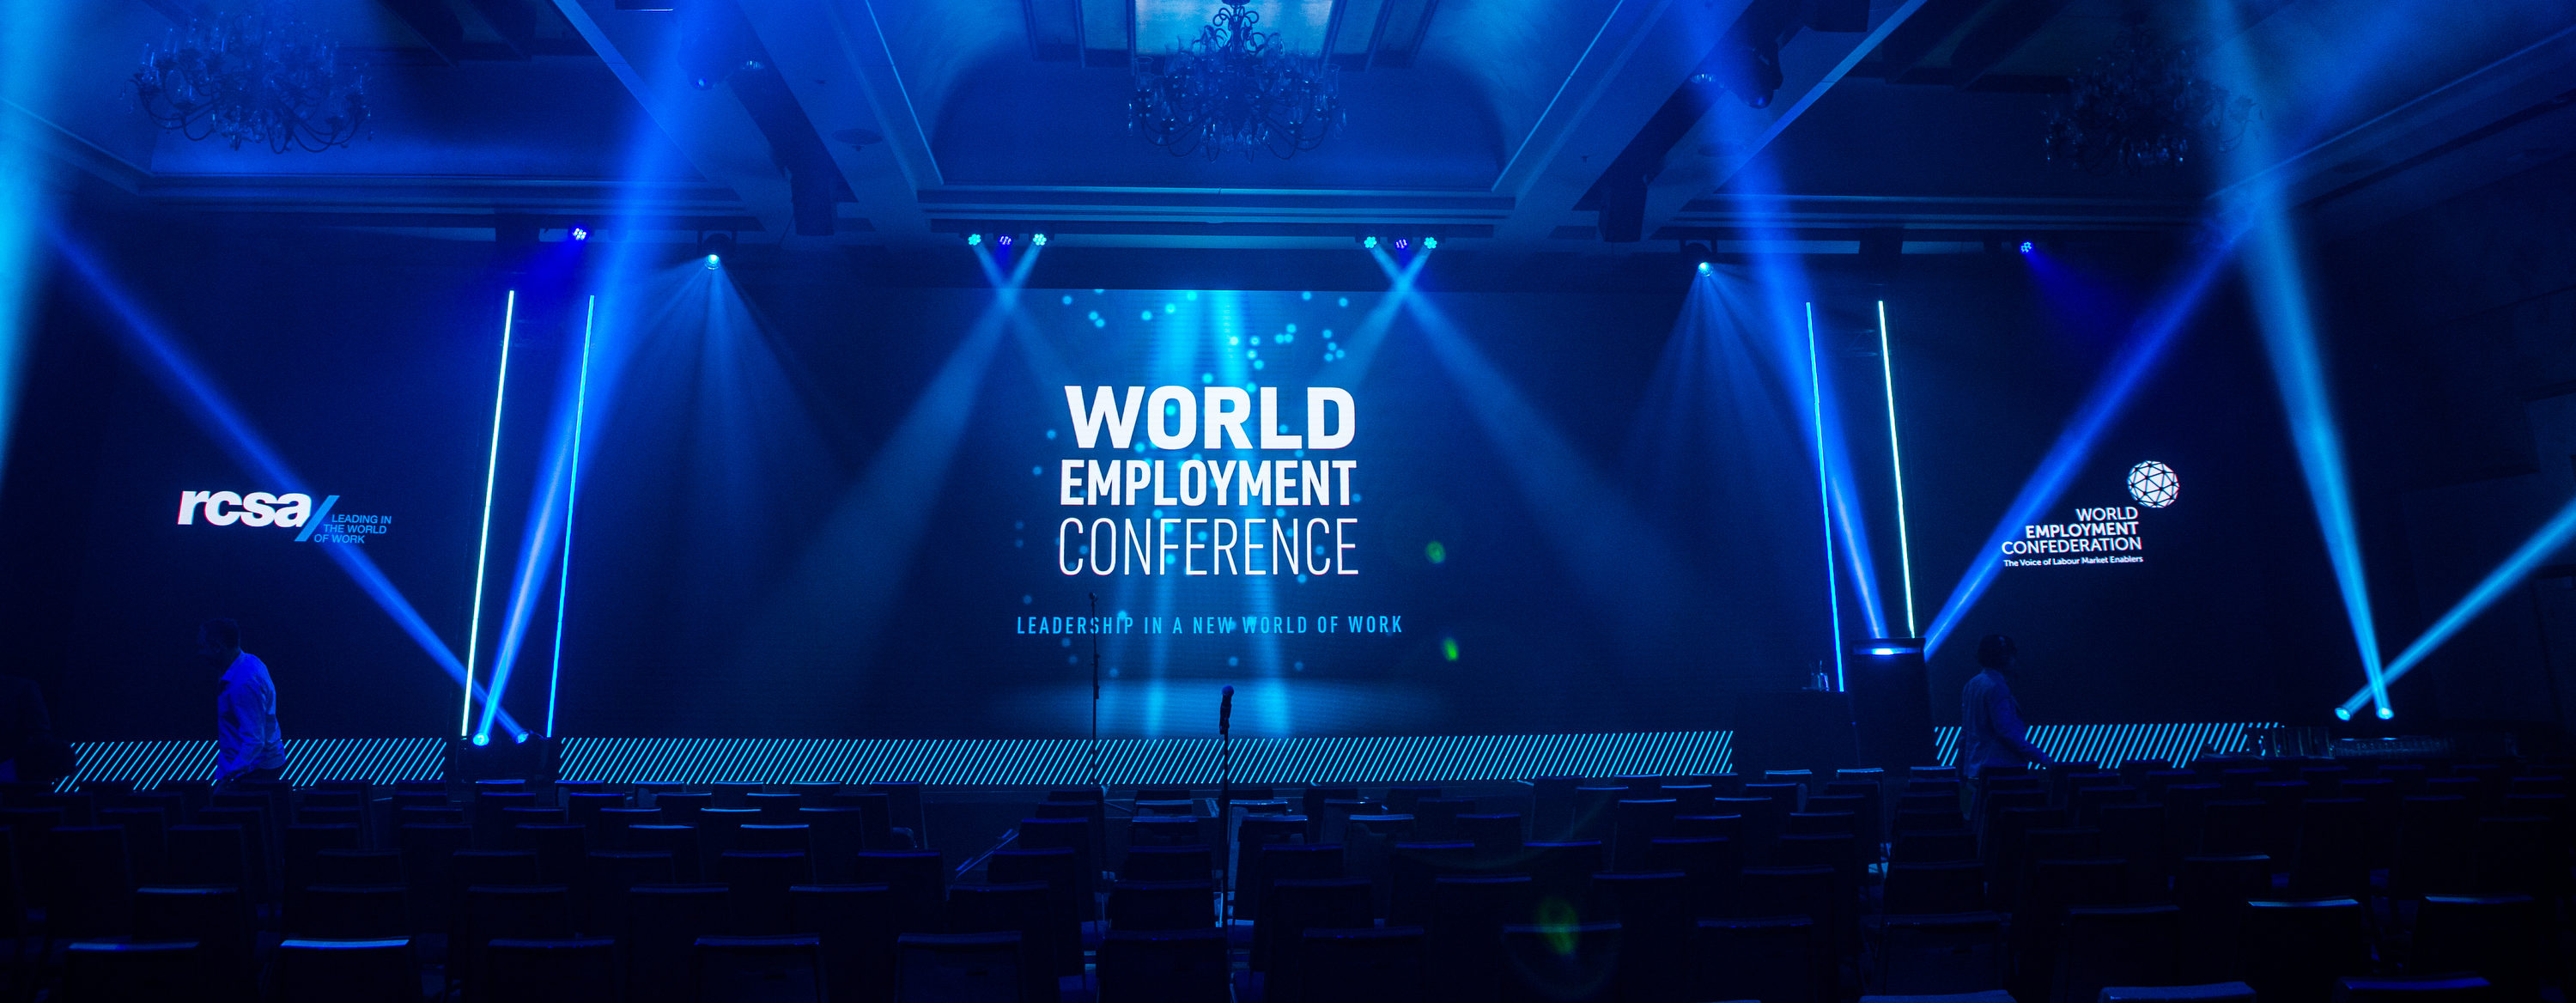 3 lessons from the World Employment Conference 2019 World Employment